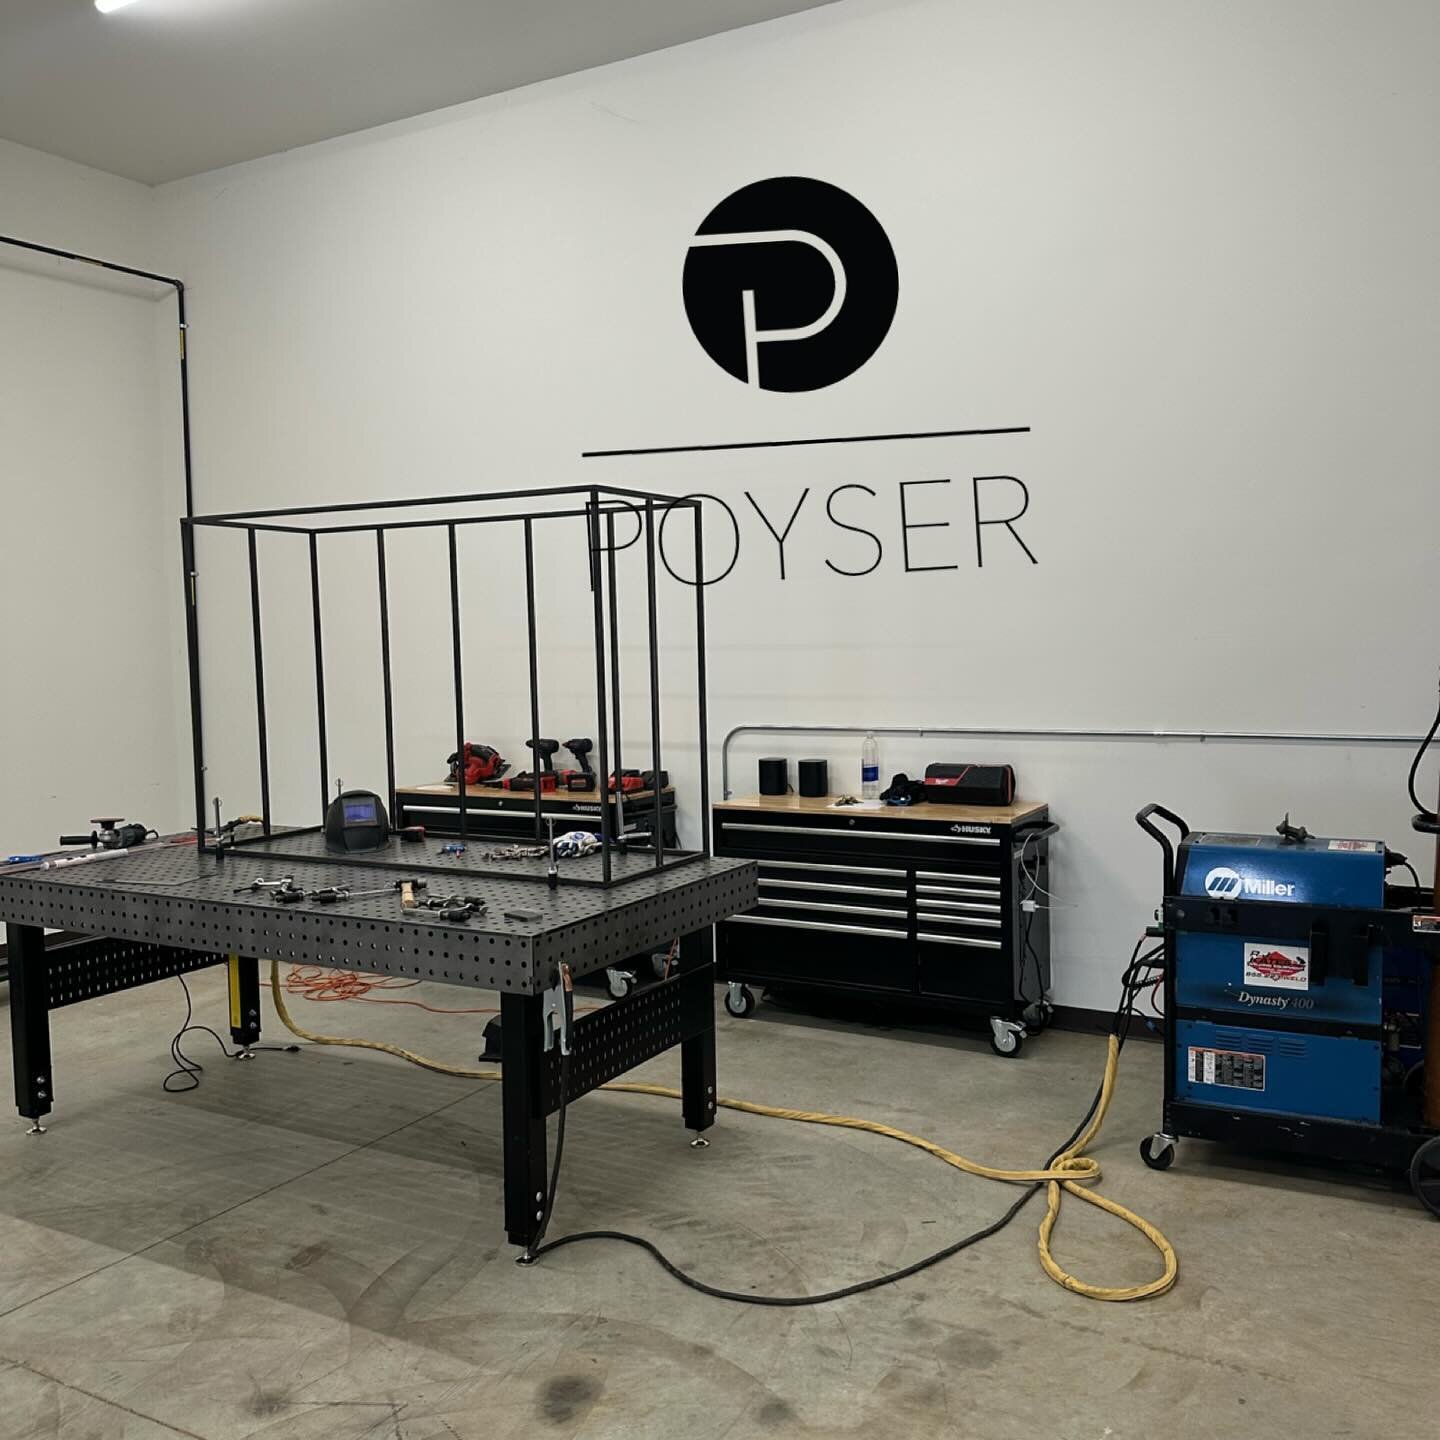 1st job in the Tennessee shop thanks to @theposhhome. We are so grateful for our clients and vendors that have made this possible. 
@r.j.kates 
@schorr_metals 

#poyserco #rjkates #designer #welder #metalwork